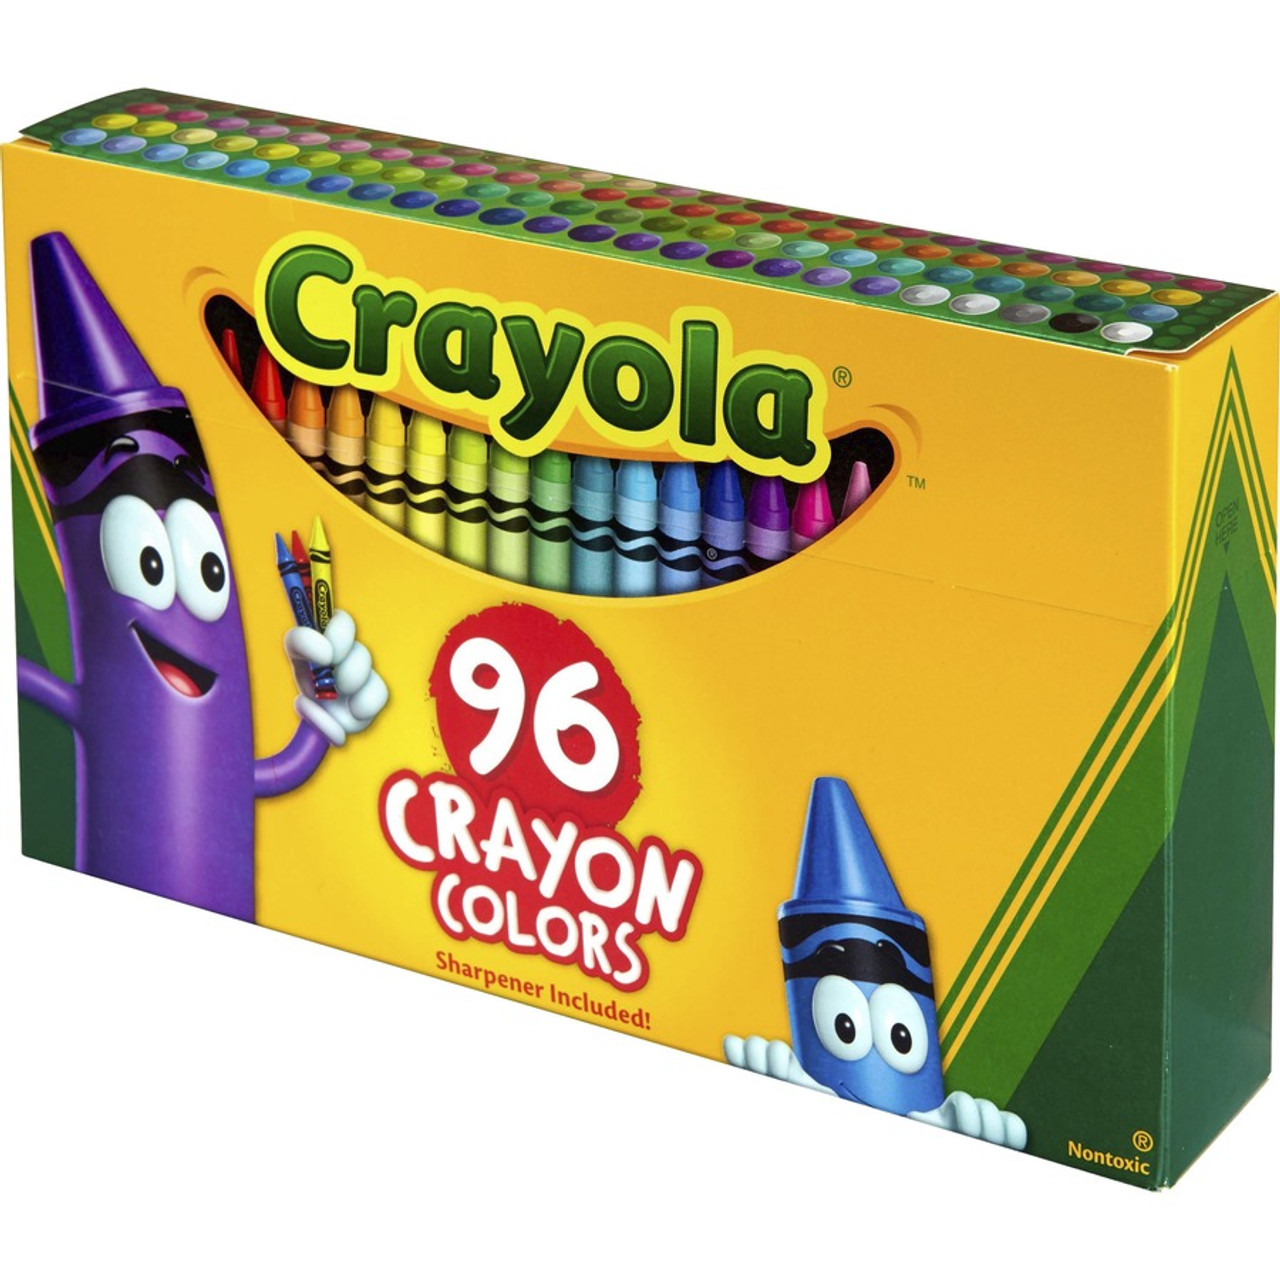 96 Pack Crayons - Wholesale Bright Wax Coloring Crayons in Bulk, 5 Per Box  in Assorted Bundle